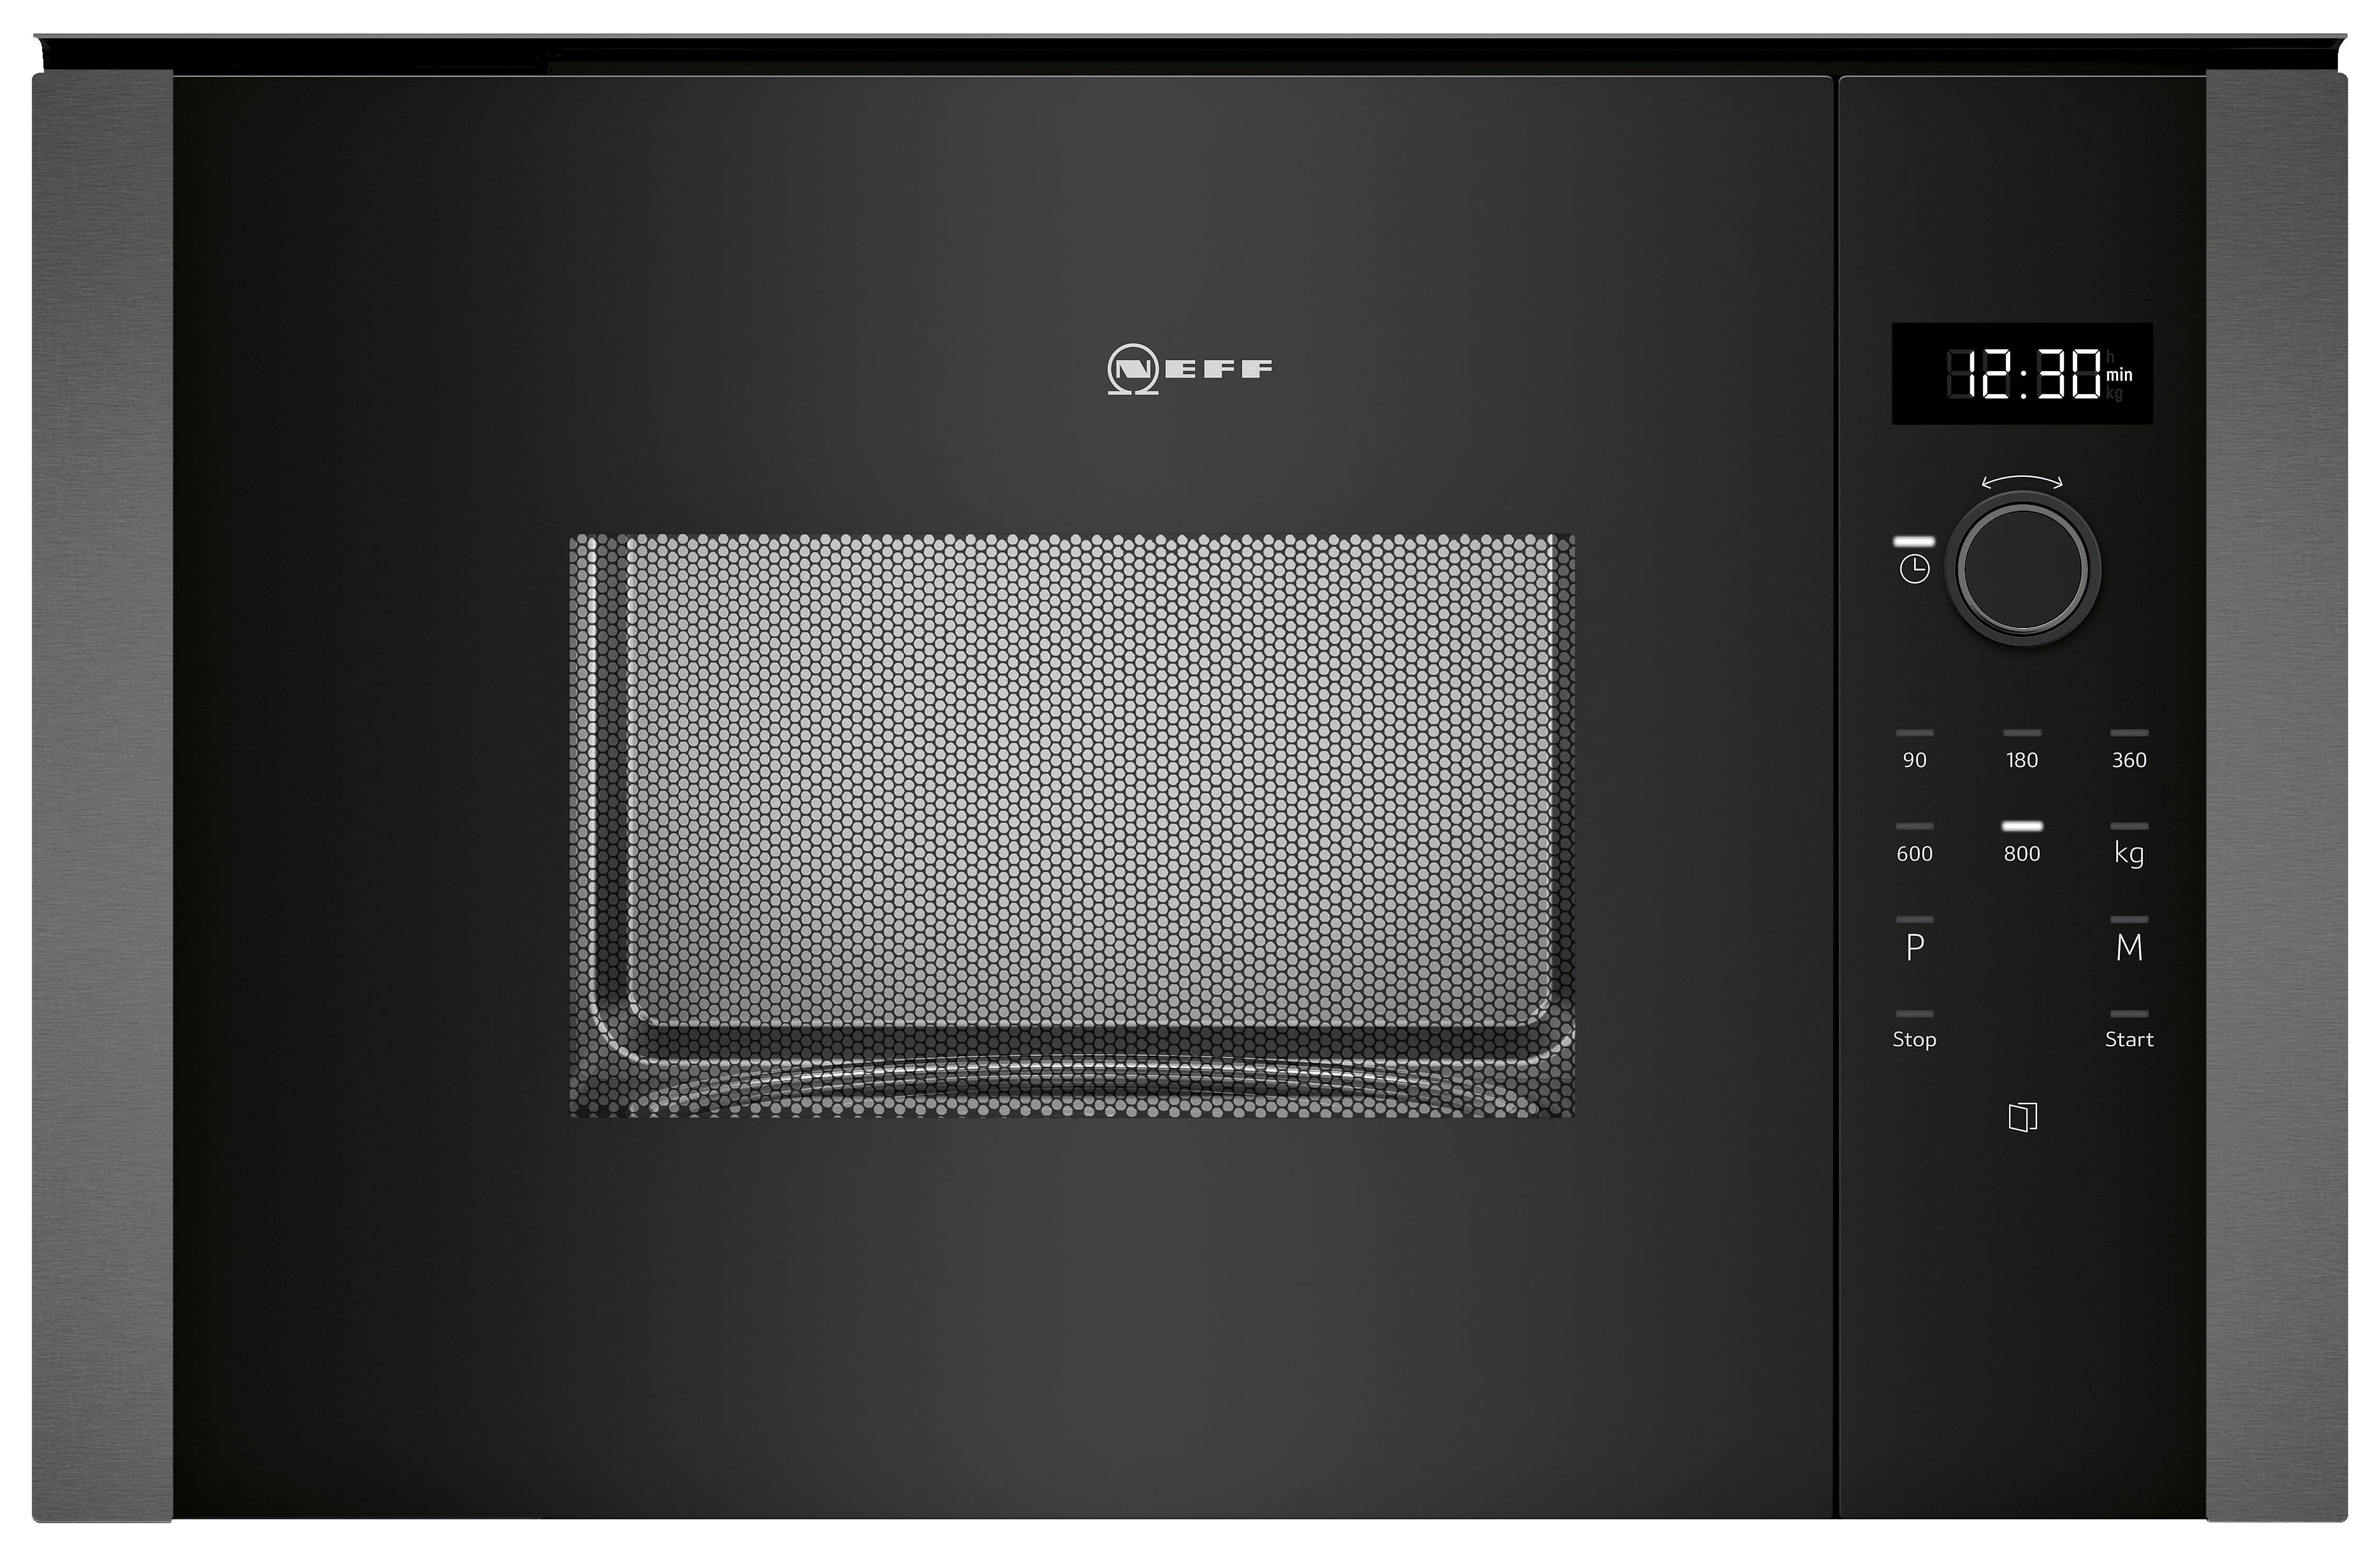 NEFF HLAWD23G0B N50 Built-in Microwave Oven - Graphite